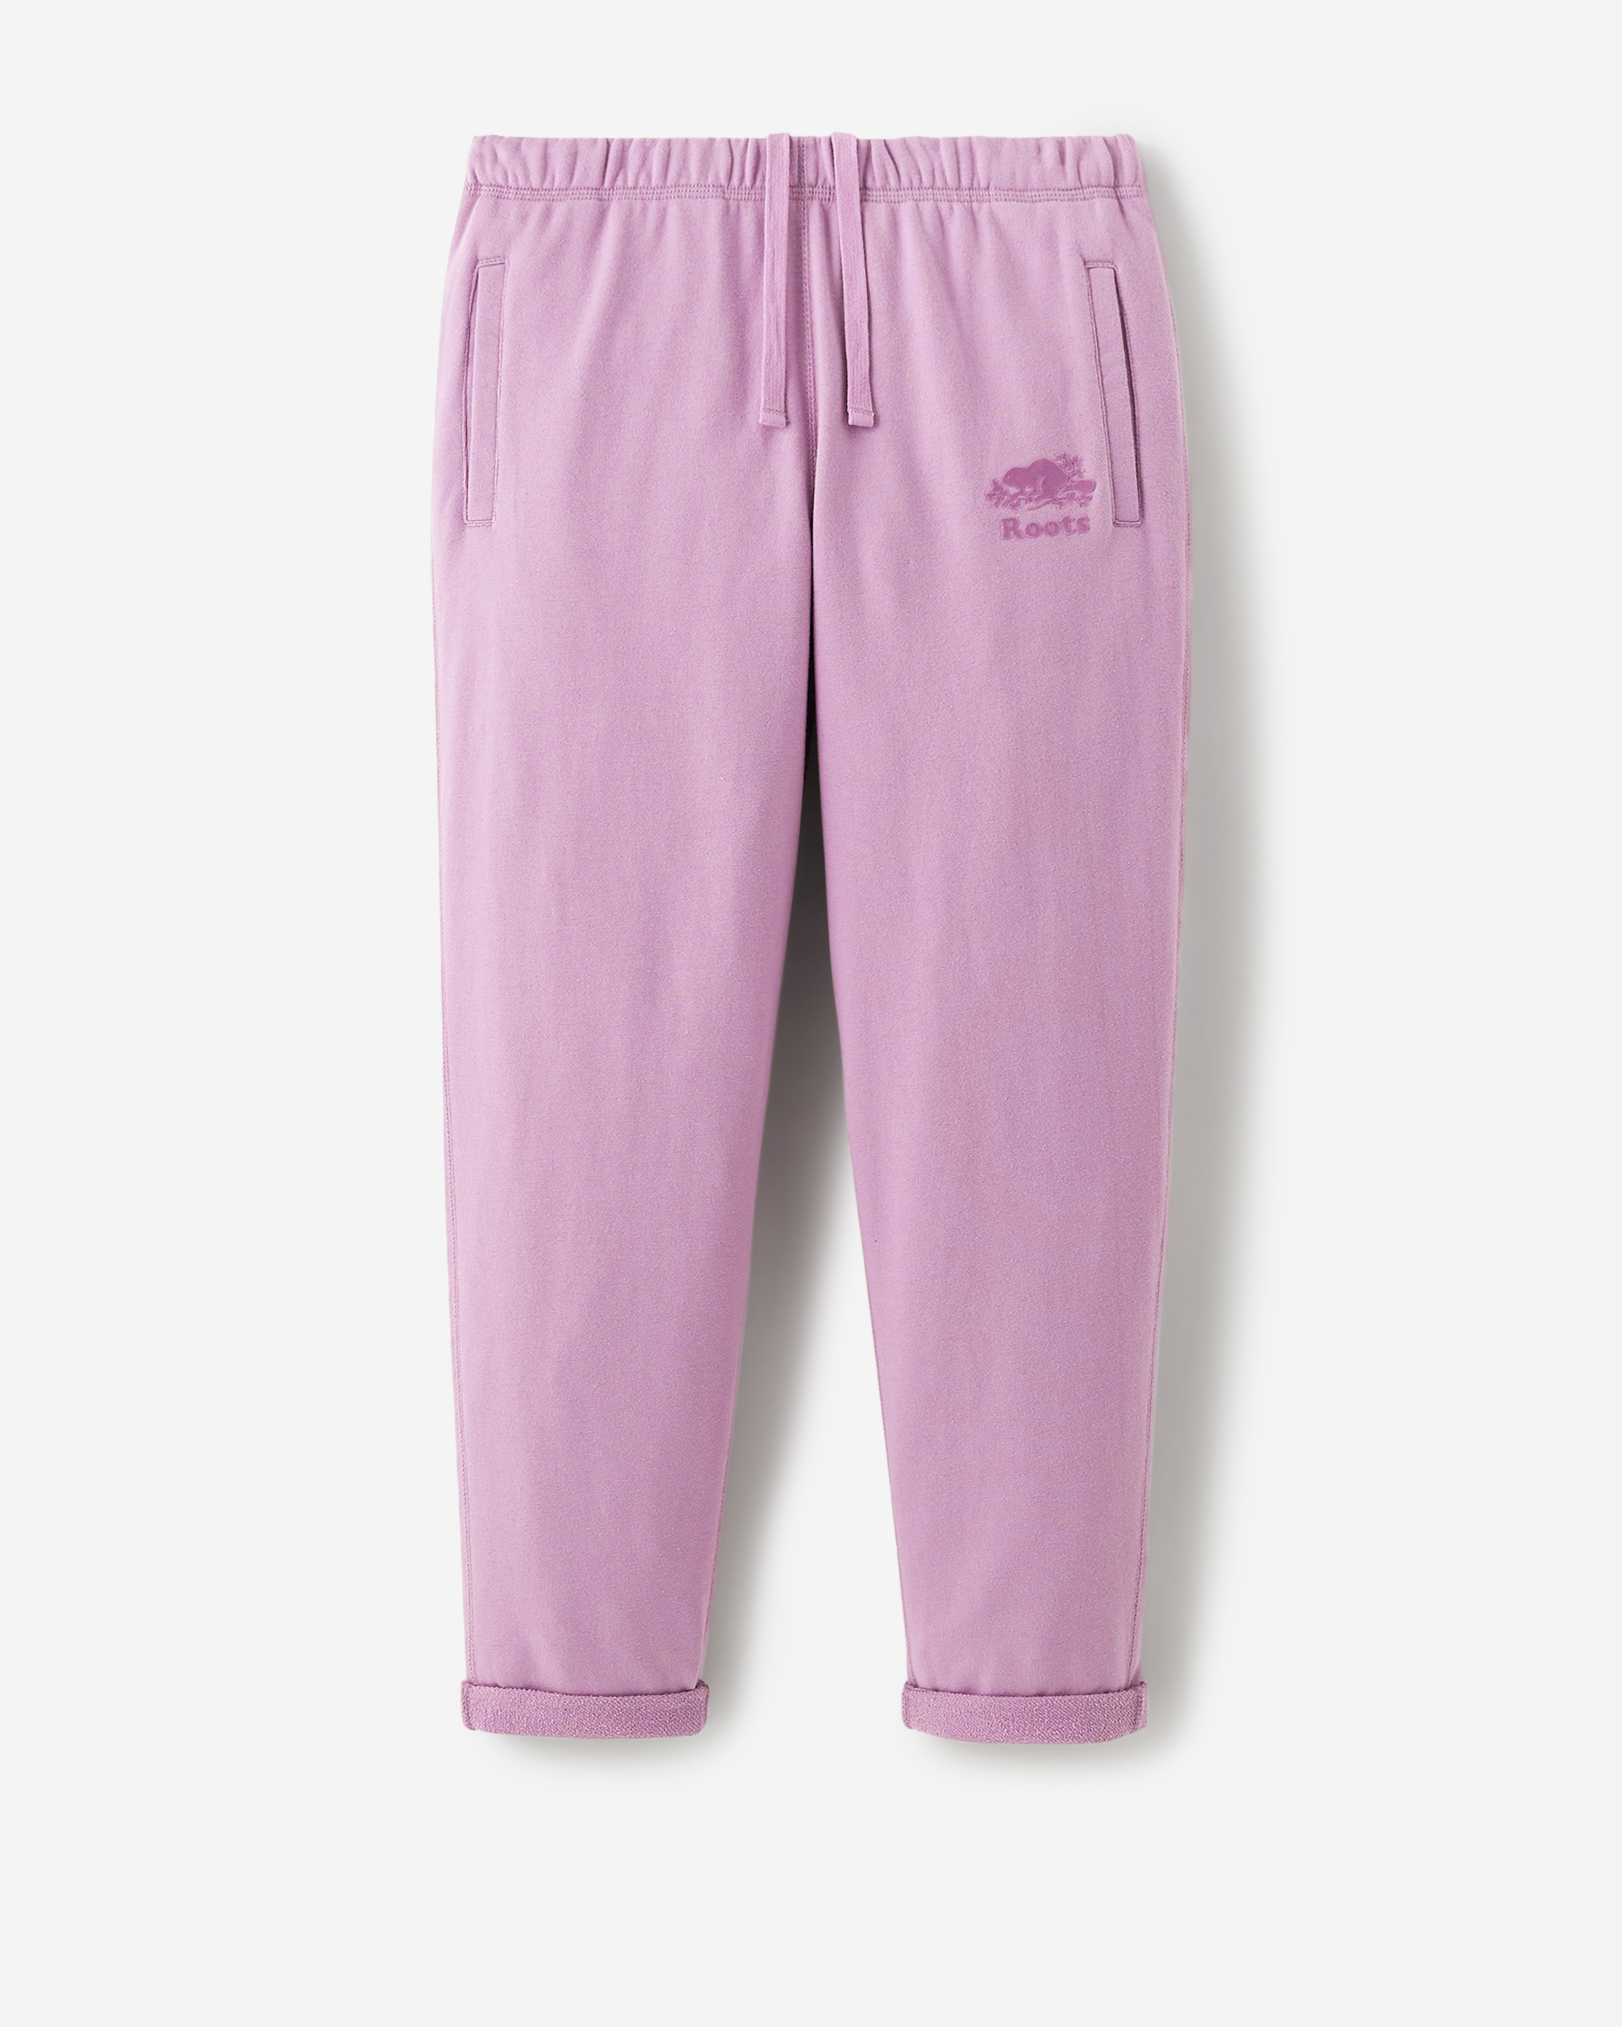 Roots Organic Easy Ankle Sweatpant in Orchid Haze